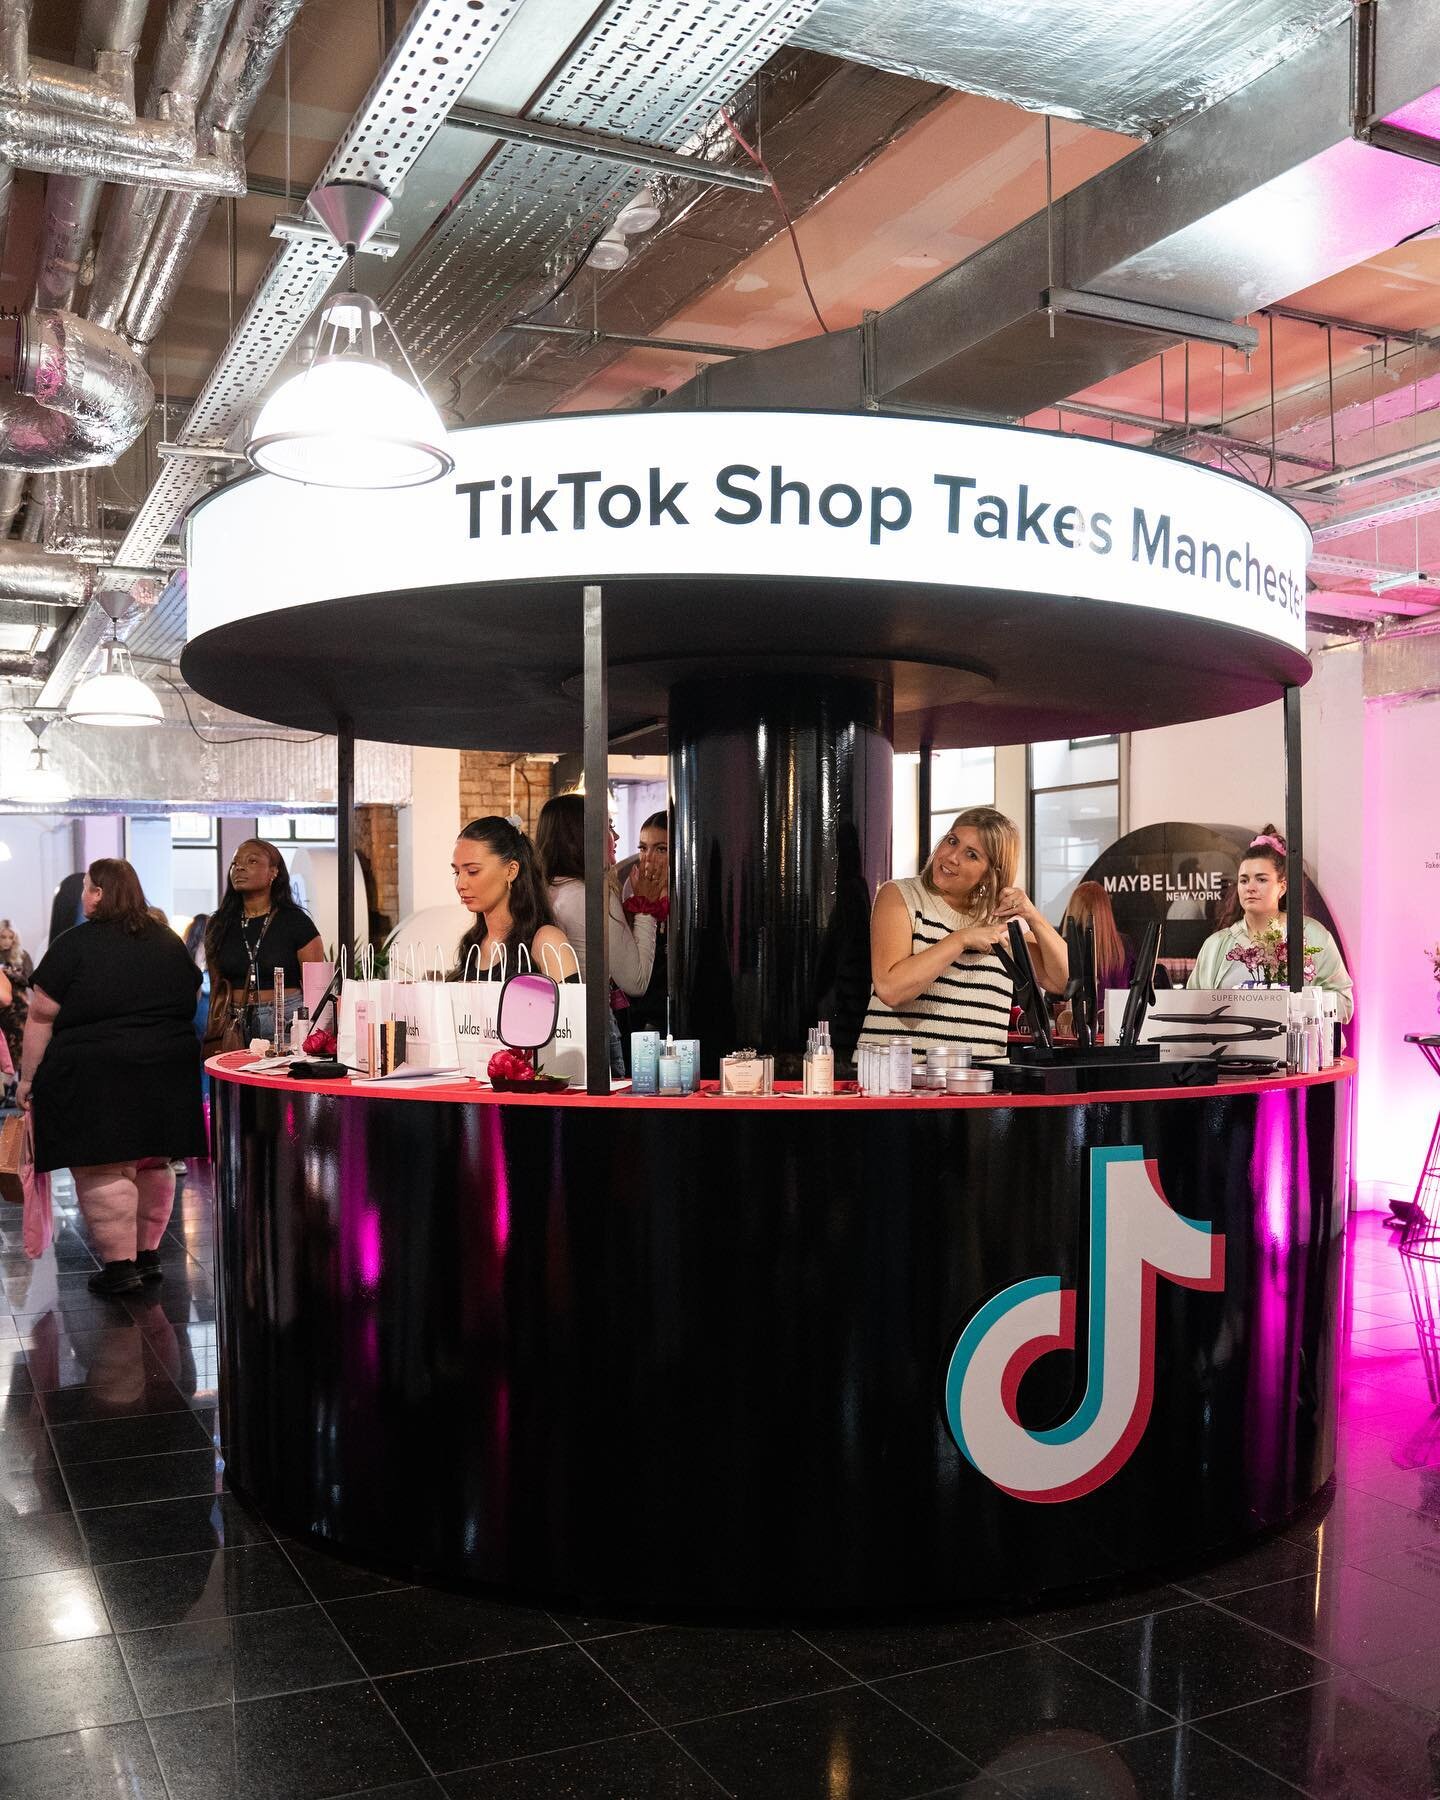 The star of the show was the TikTok Beauty Hub, where a select few brands could showcase their top products. A large carousel with lightbox branding and a conveyor belt style counter.&nbsp;

@tiktokshop_uk
#TikTokShopTakesManchester